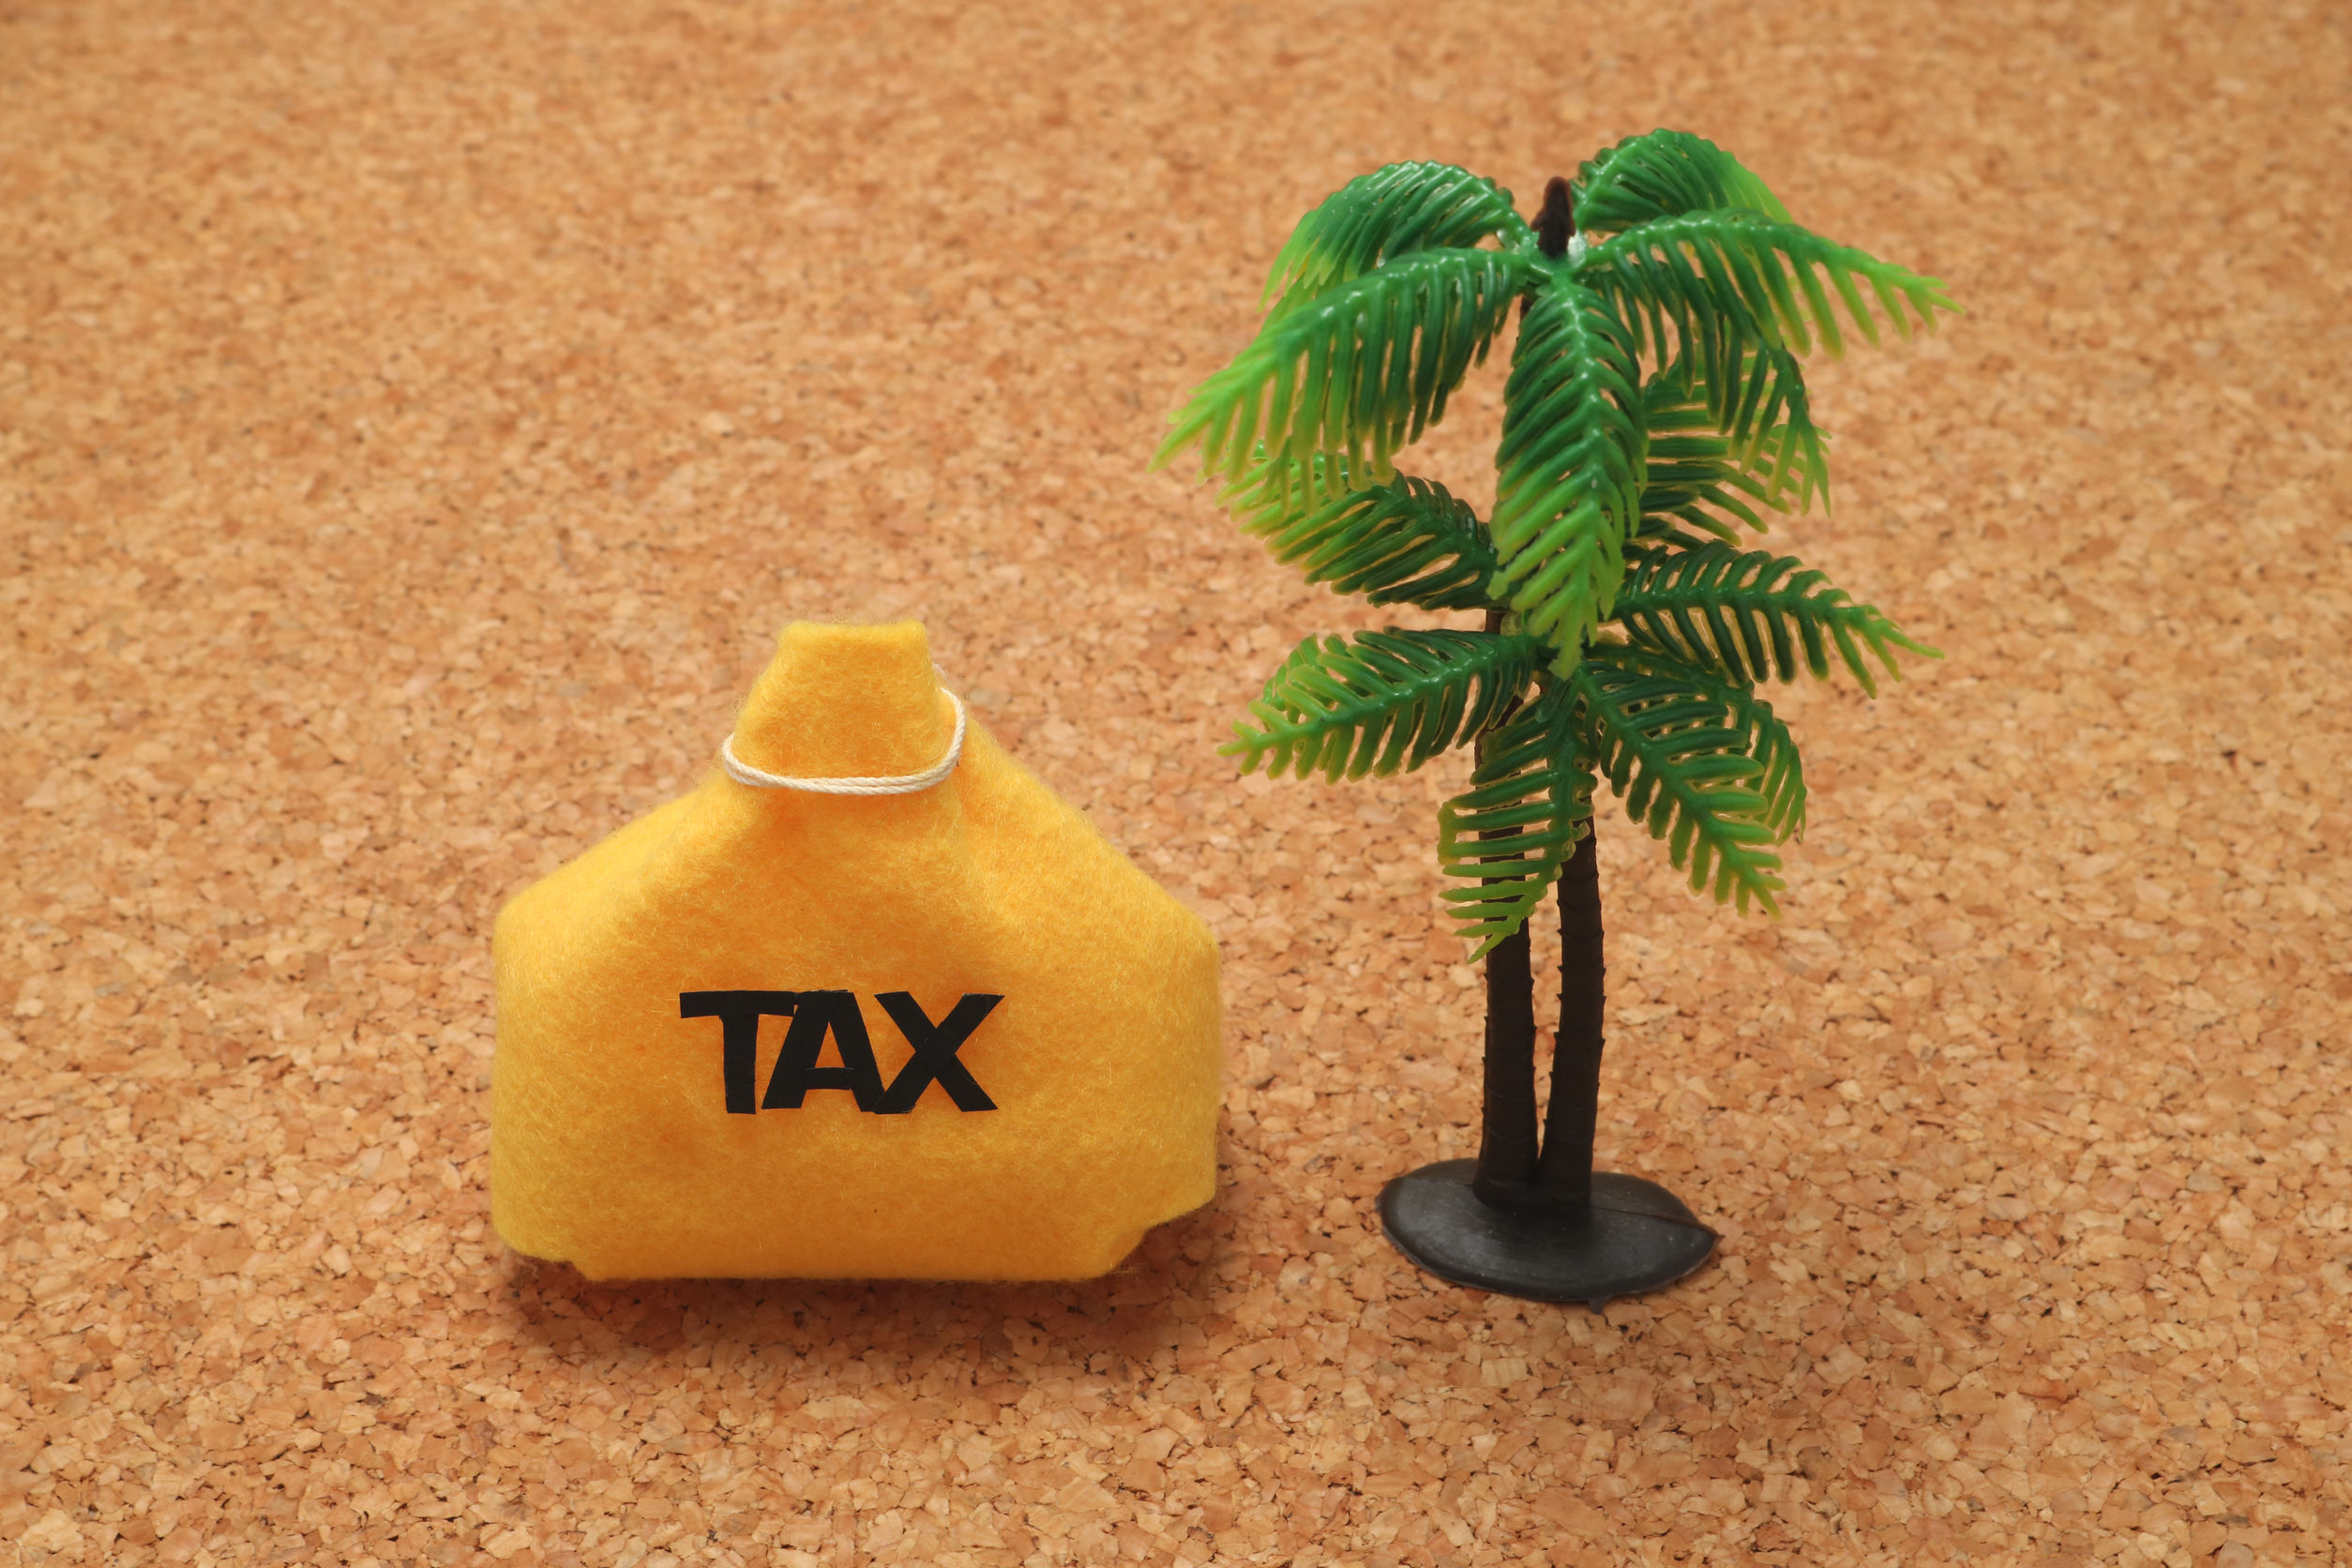 59068196 - tax and palm trees. offshore island. financial concept.